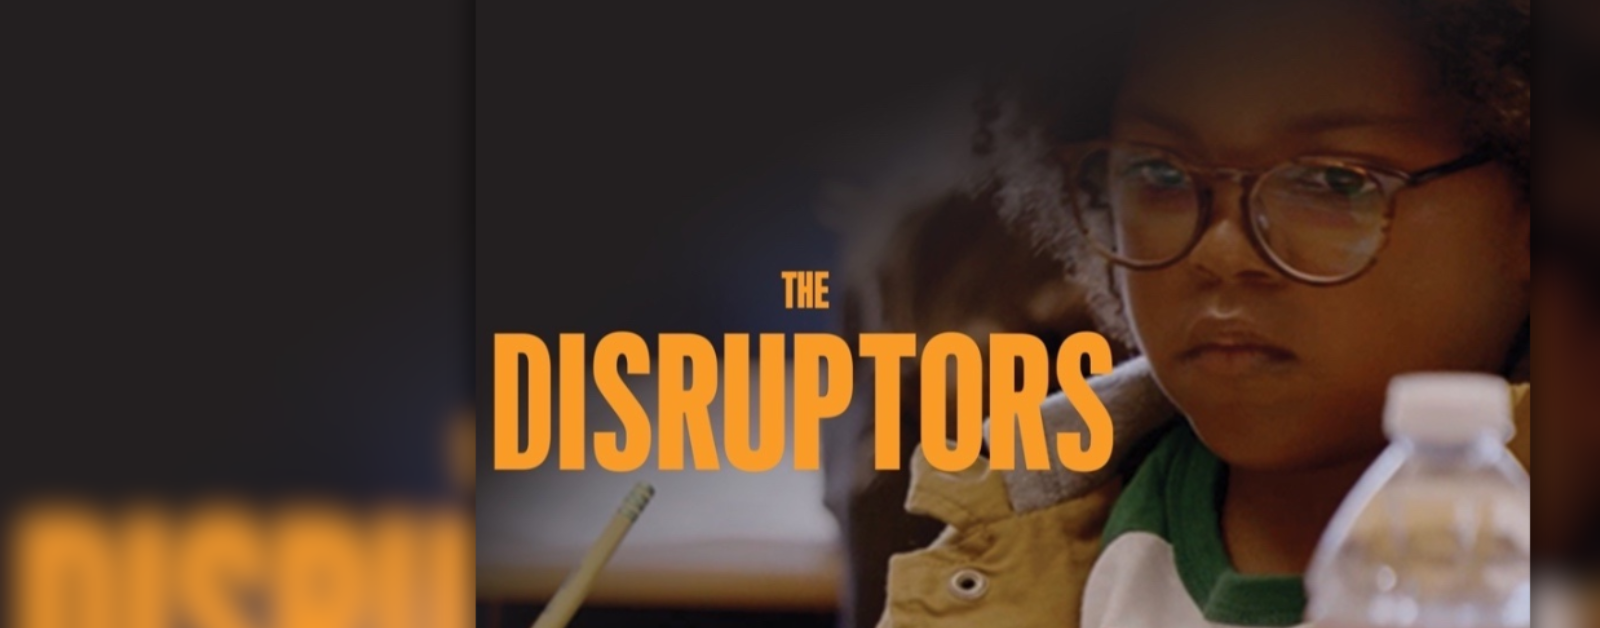 screenshot of The Disruptors documentary cover, which shows a young child staring and the title overlay in yellow/orange block letters